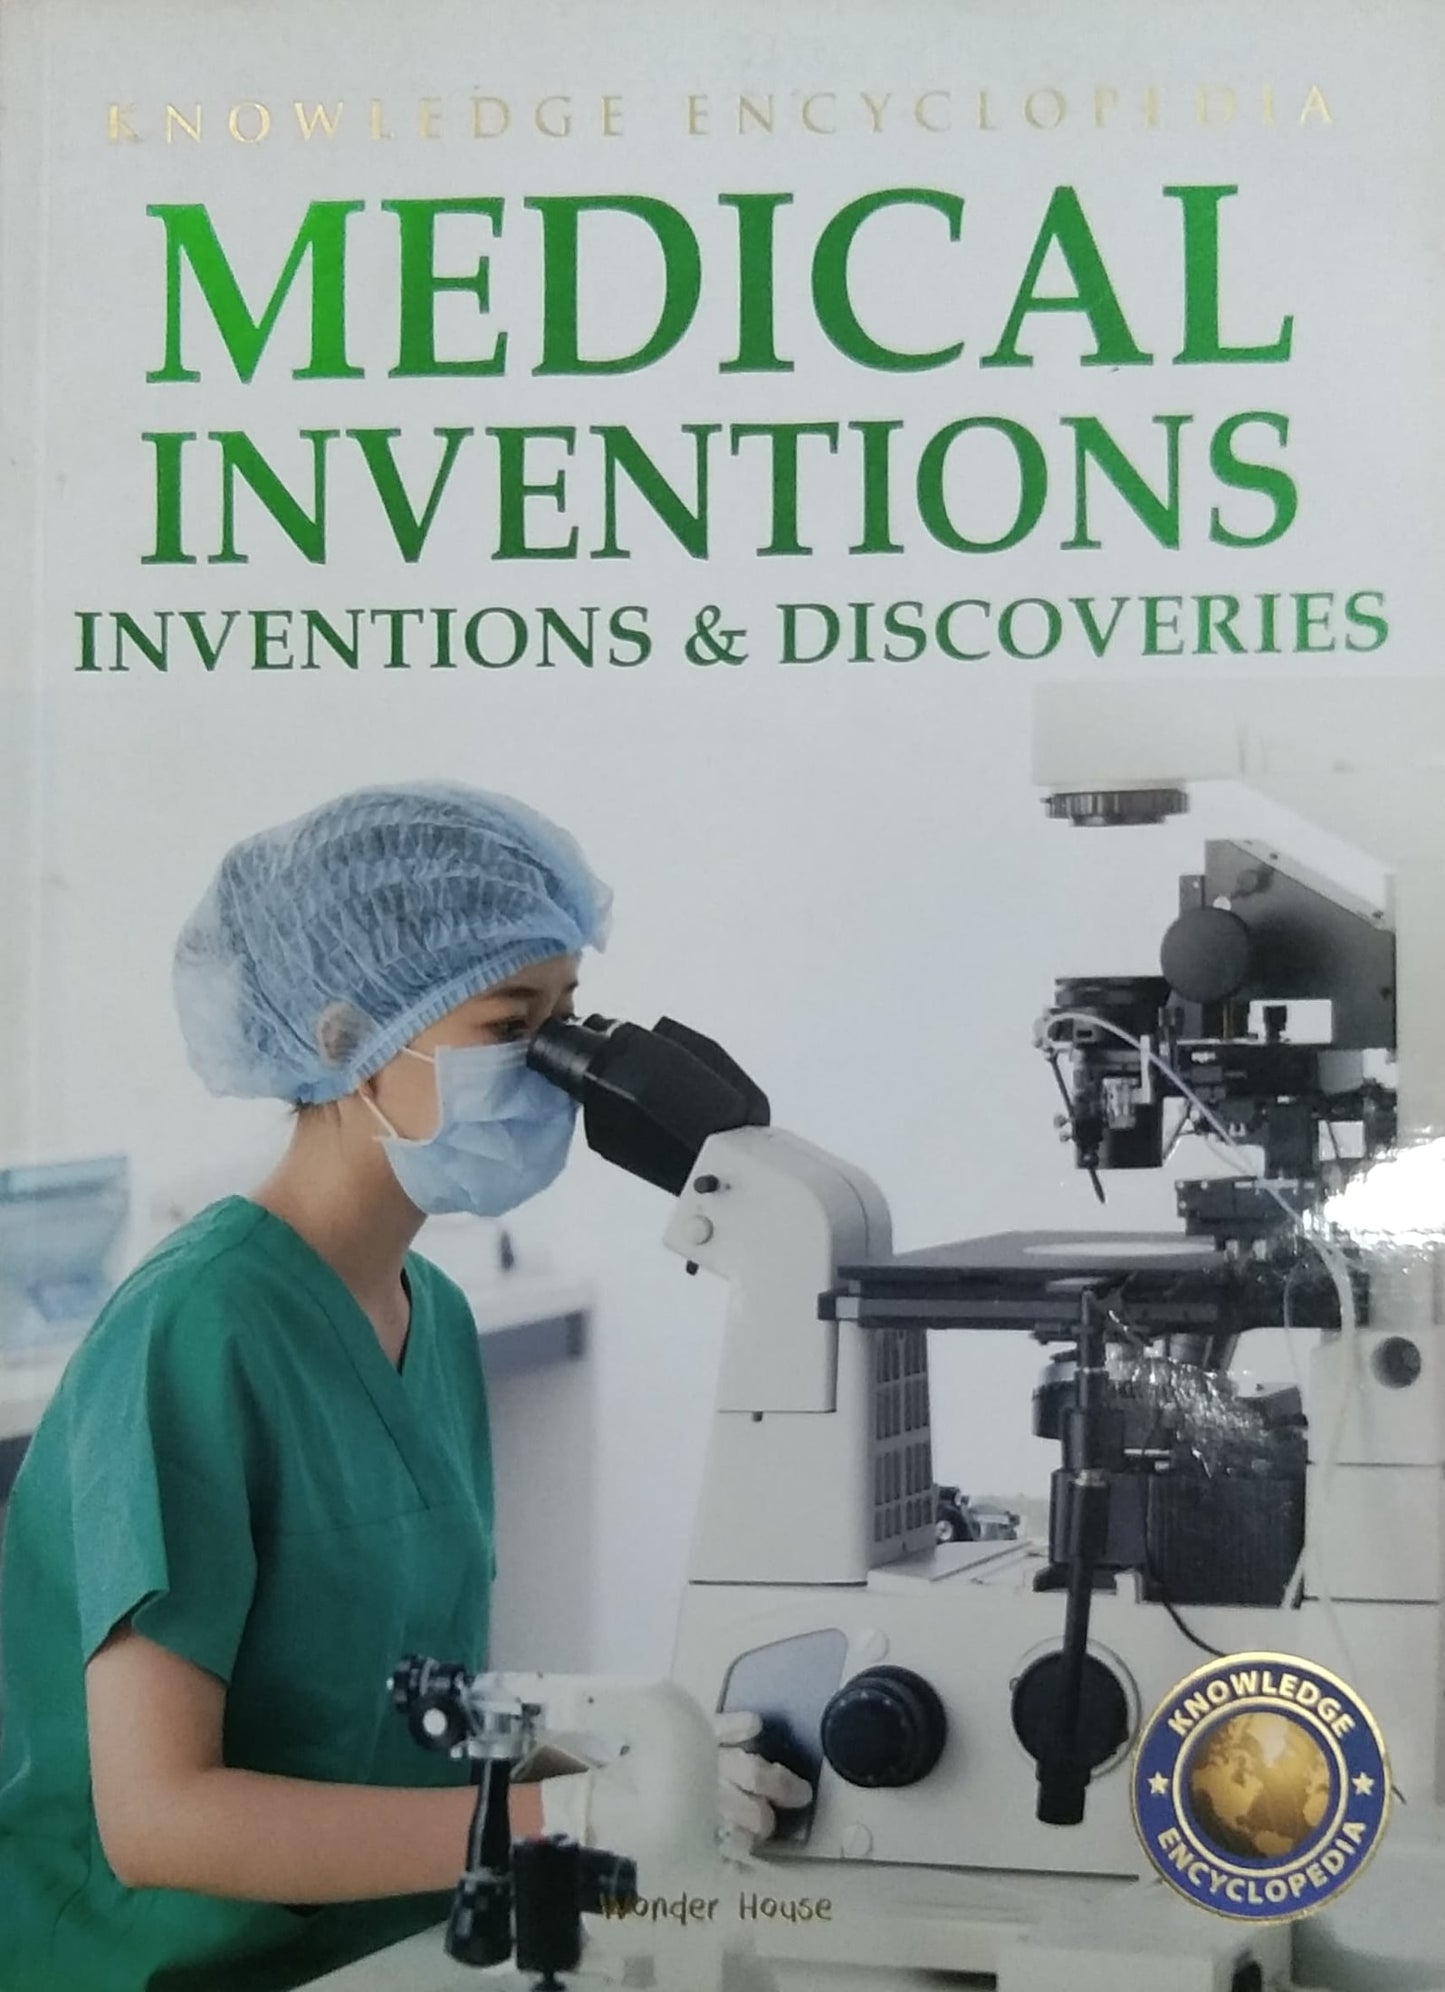 MEDICAL INVENTIONS